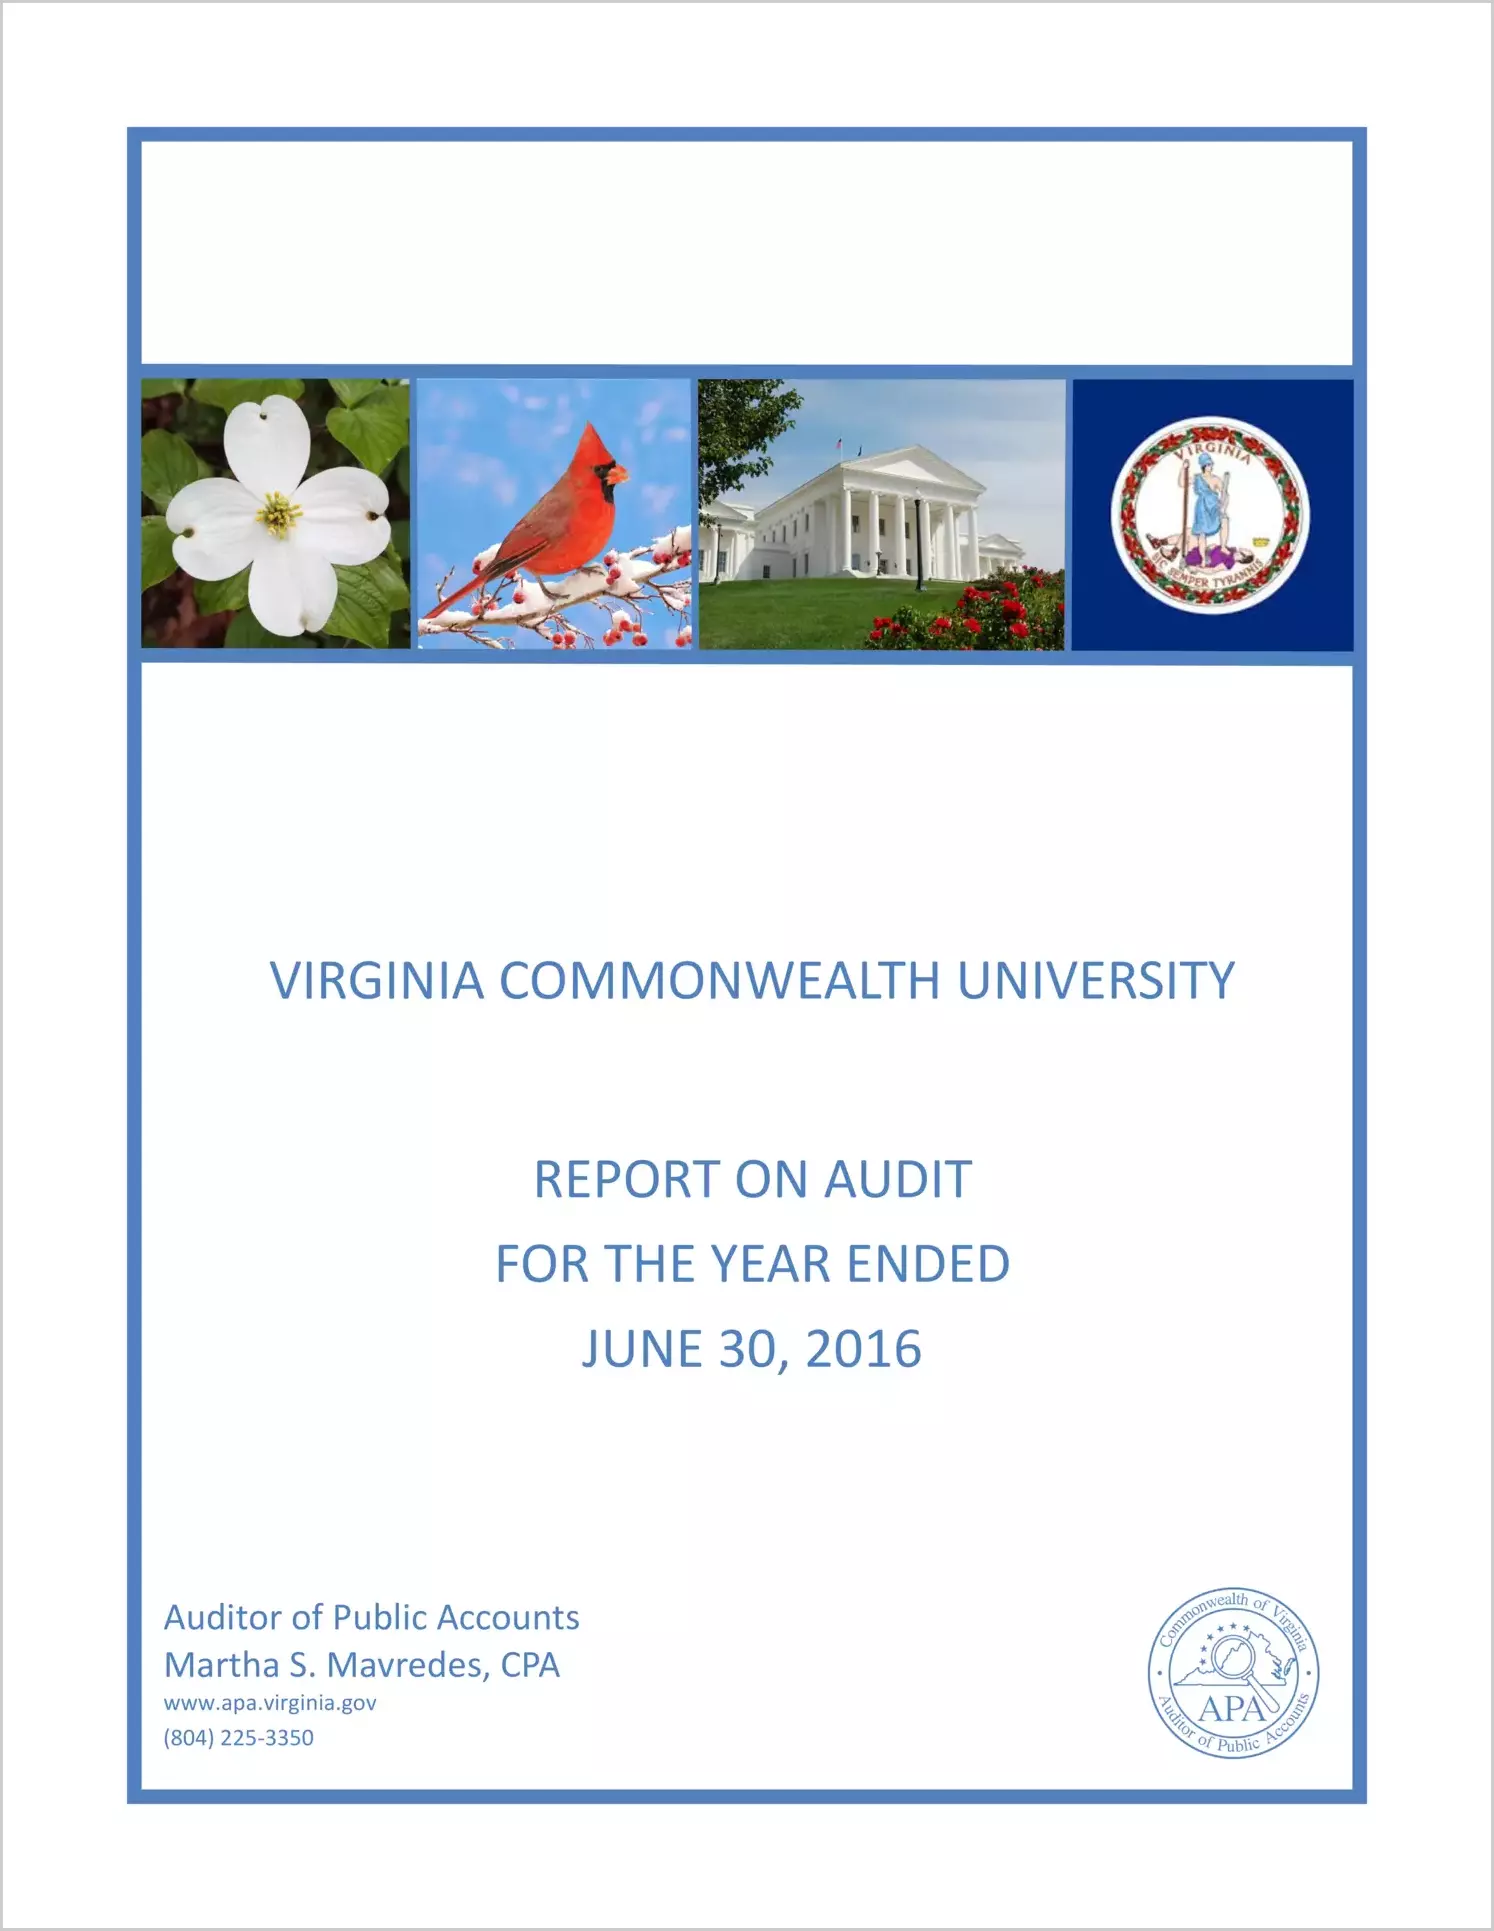 Virginia Commonwealth University for the year ended June 30, 2016